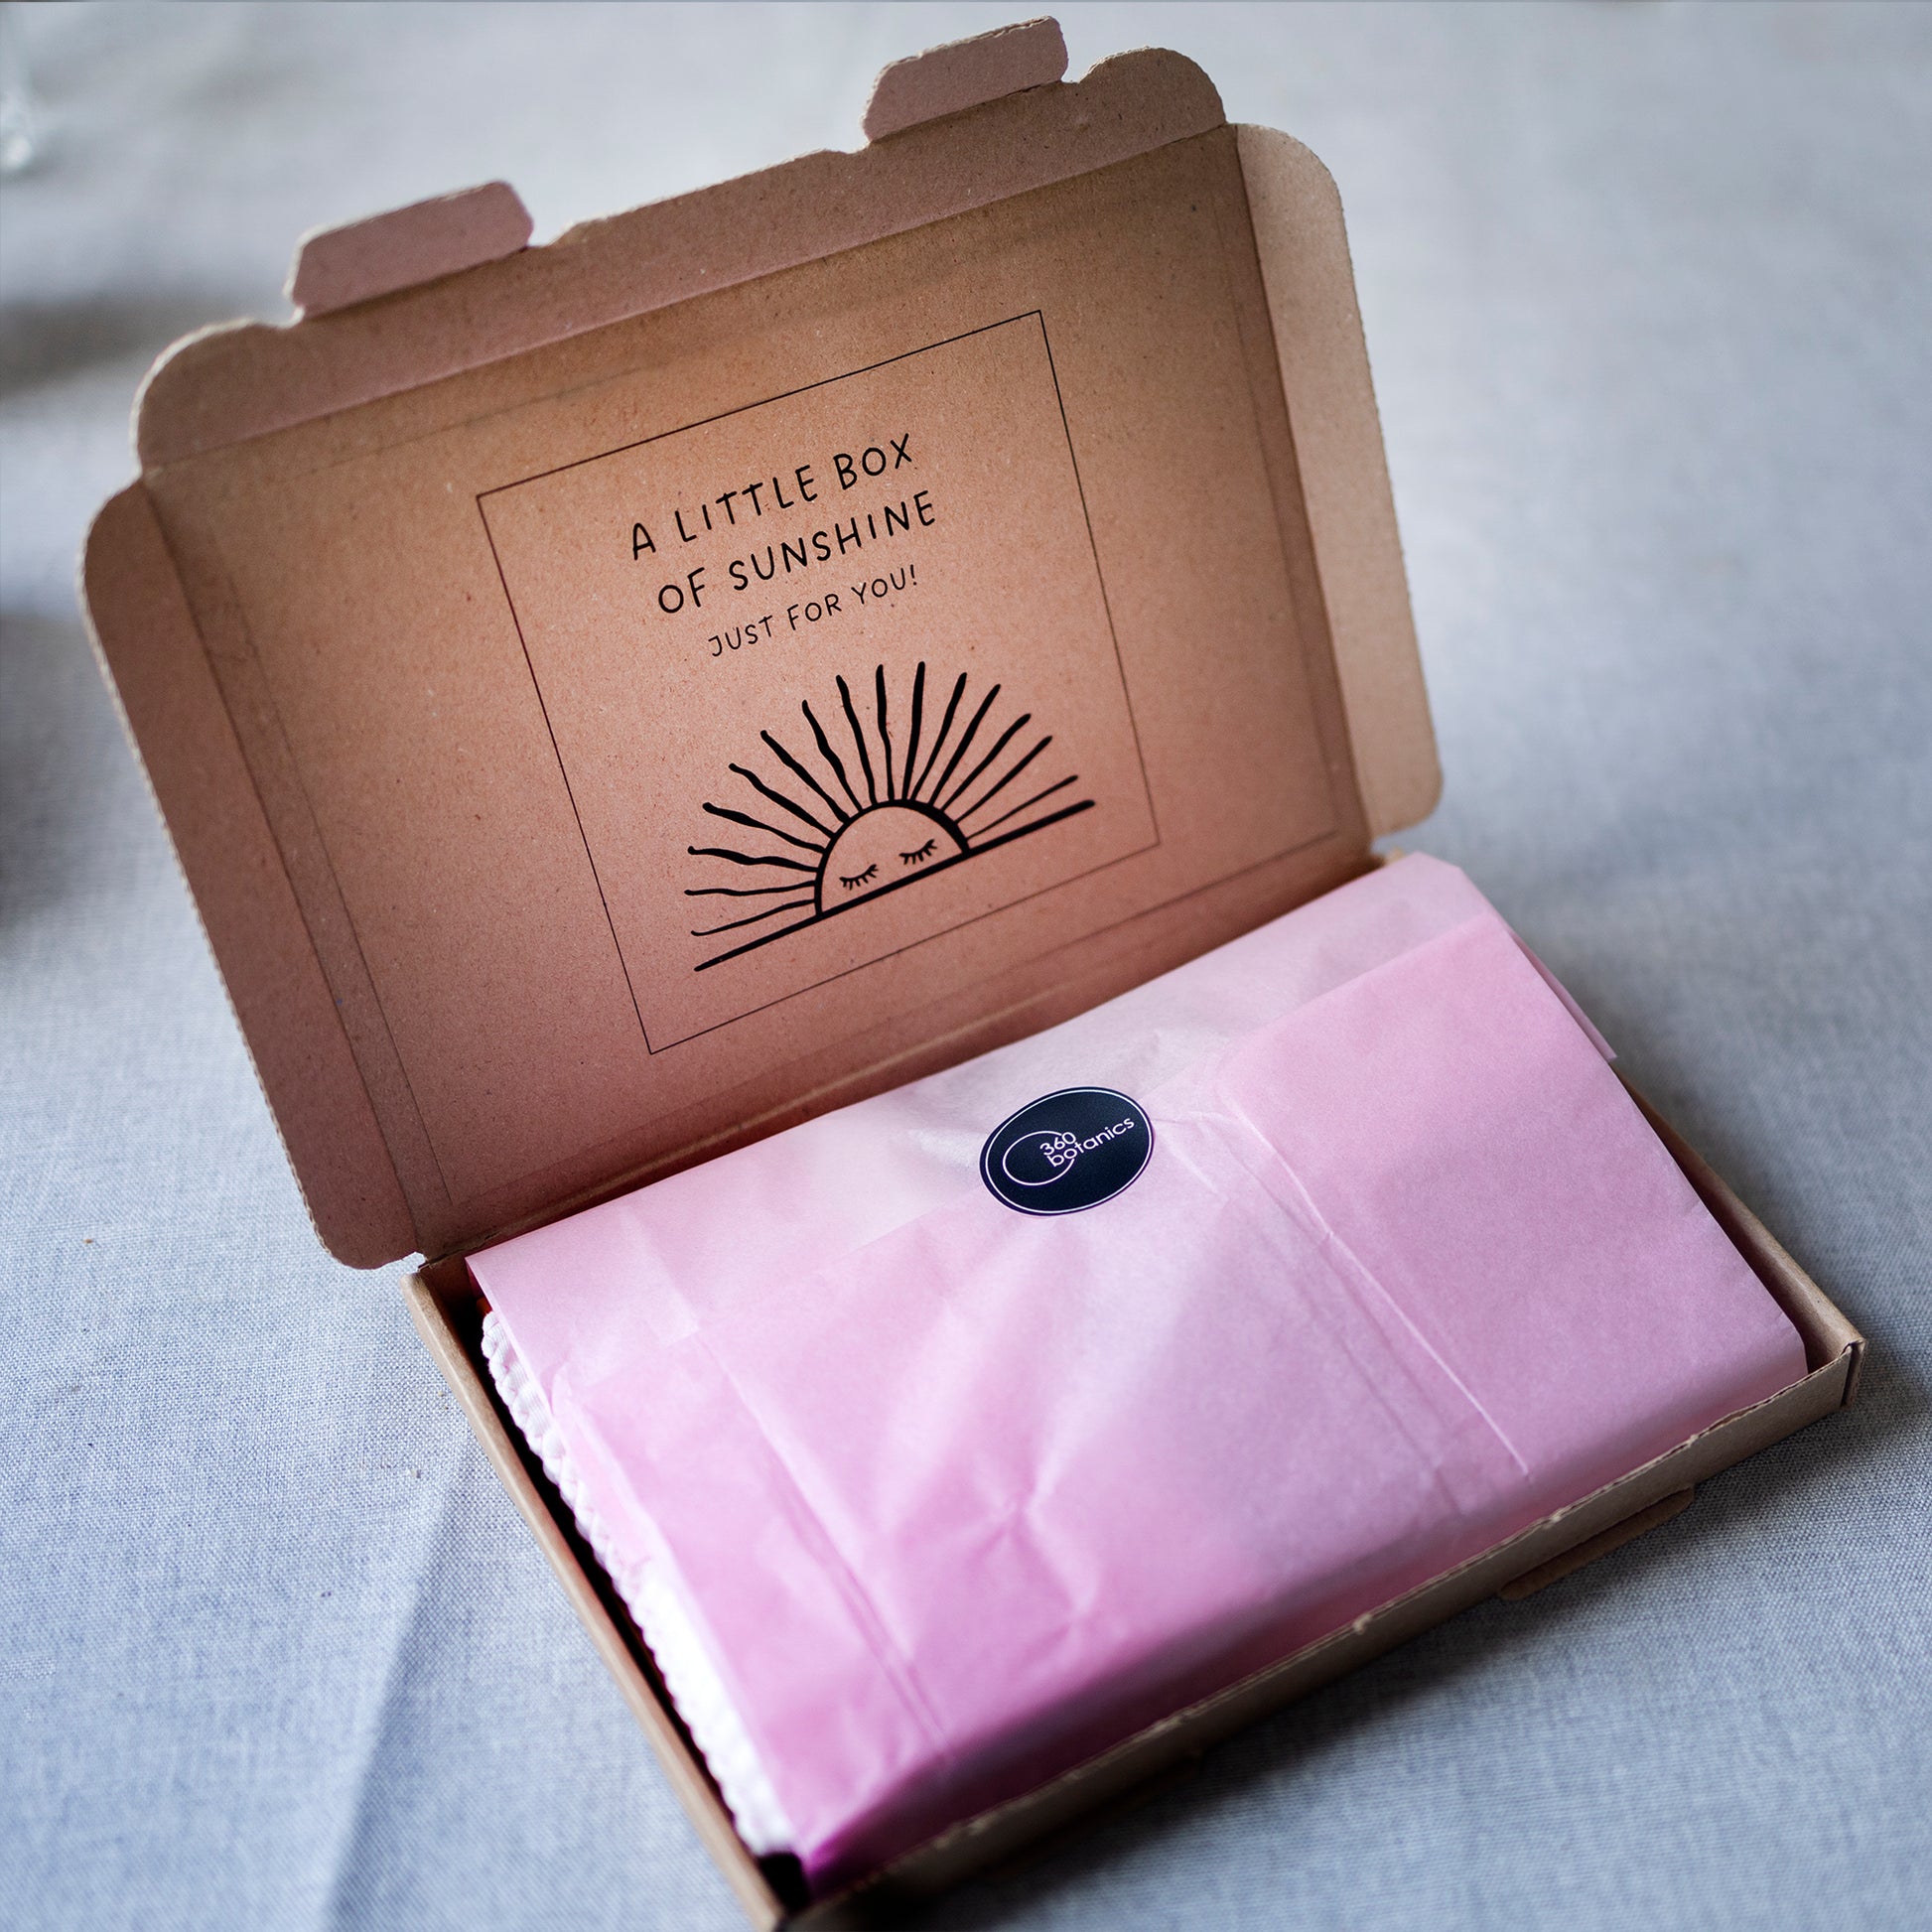 An open cardboard box with the phrase "A LITTLE BOX OF SUNSHINE JUST FOR YOU!" printed inside the lid, with a stylized sunburst design. The contents are wrapped in pink tissue paper, sealed with a round sticker bearing the 360 Botanics logo, set against a light gray fabric background